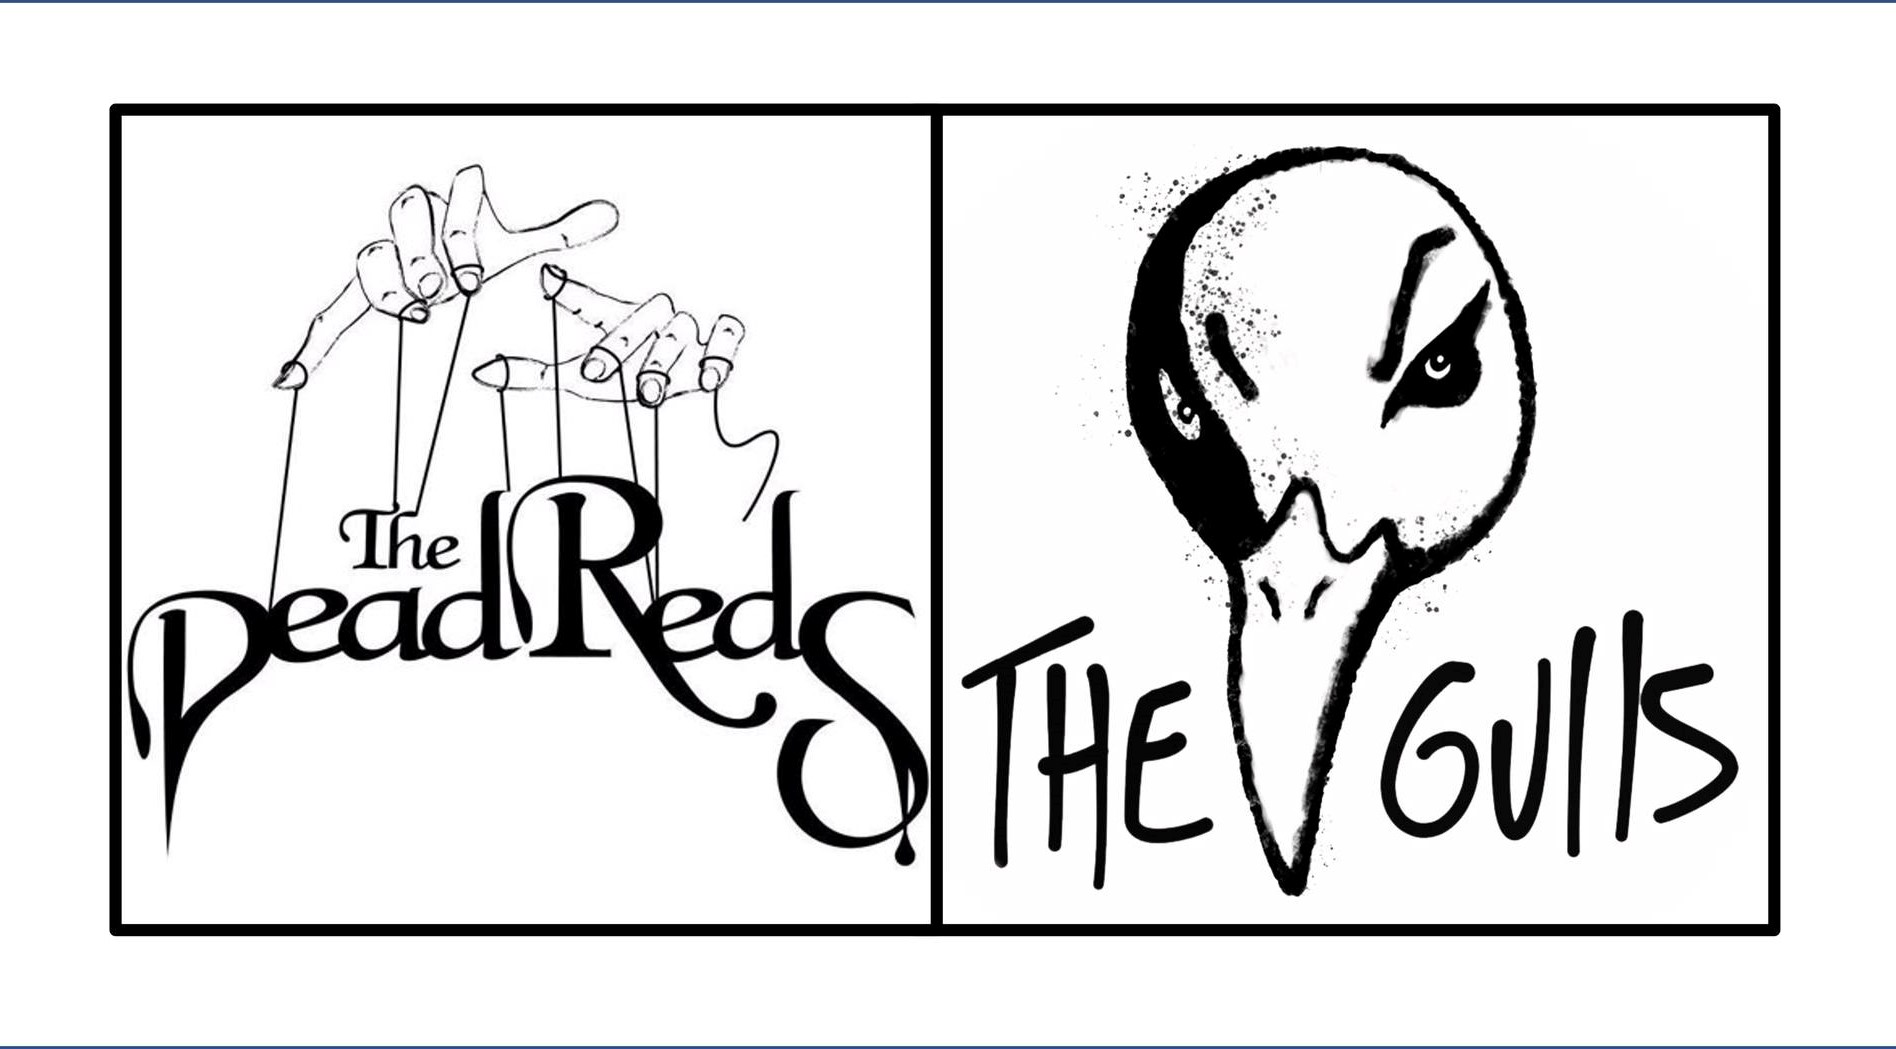 The Dead Reds & The Gulls